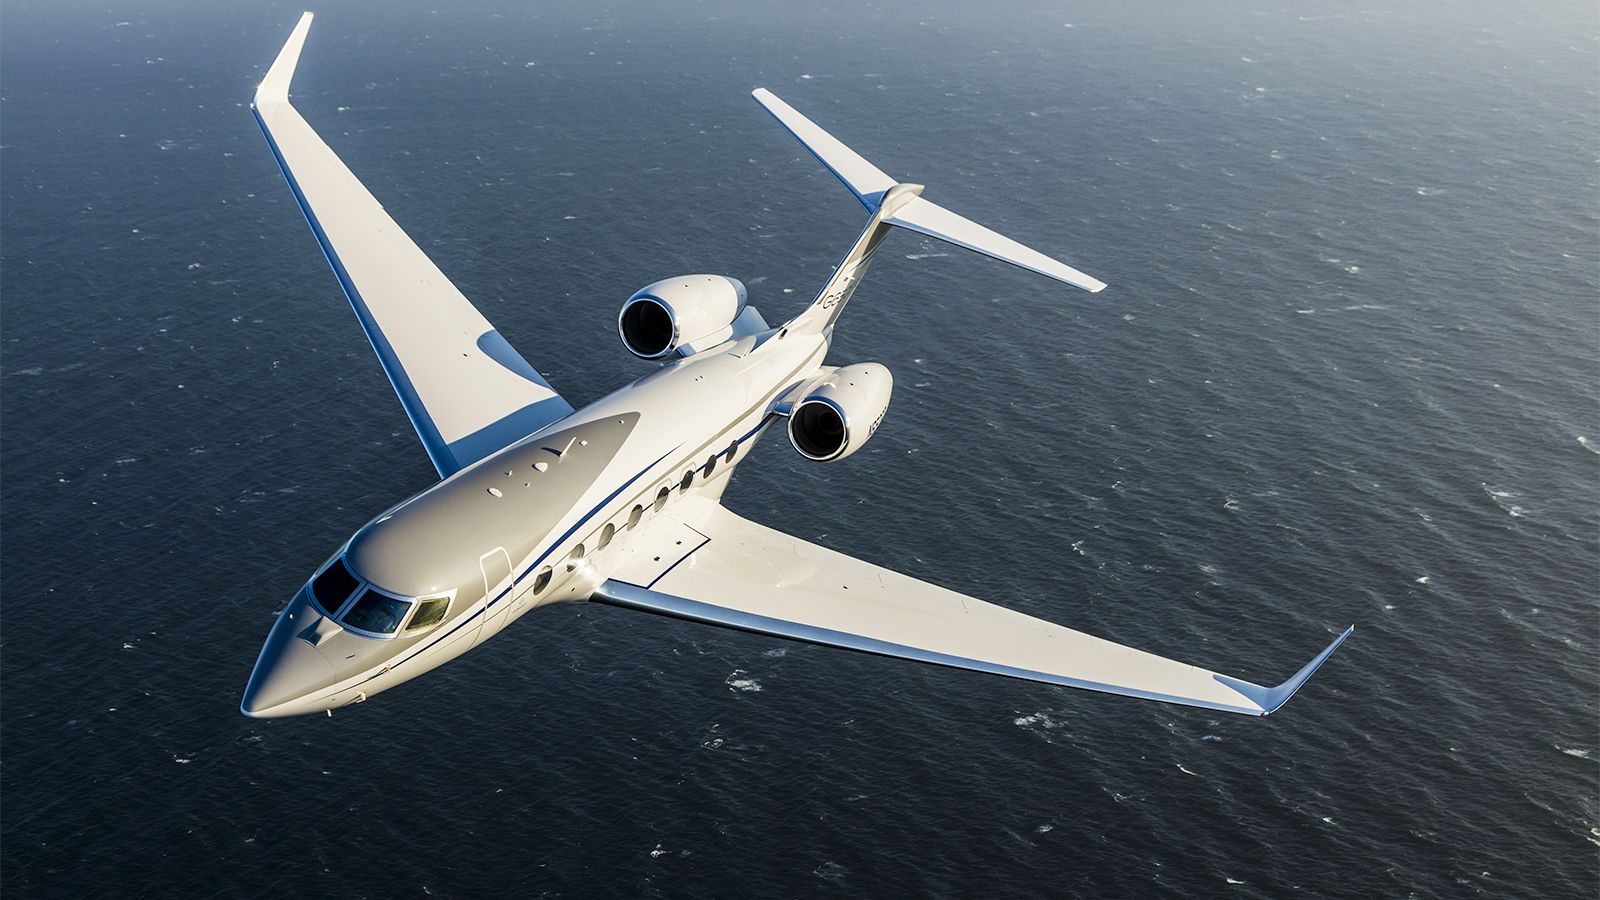 Bombardier Global 7500 vs Gulfstream G650: Battle of the private